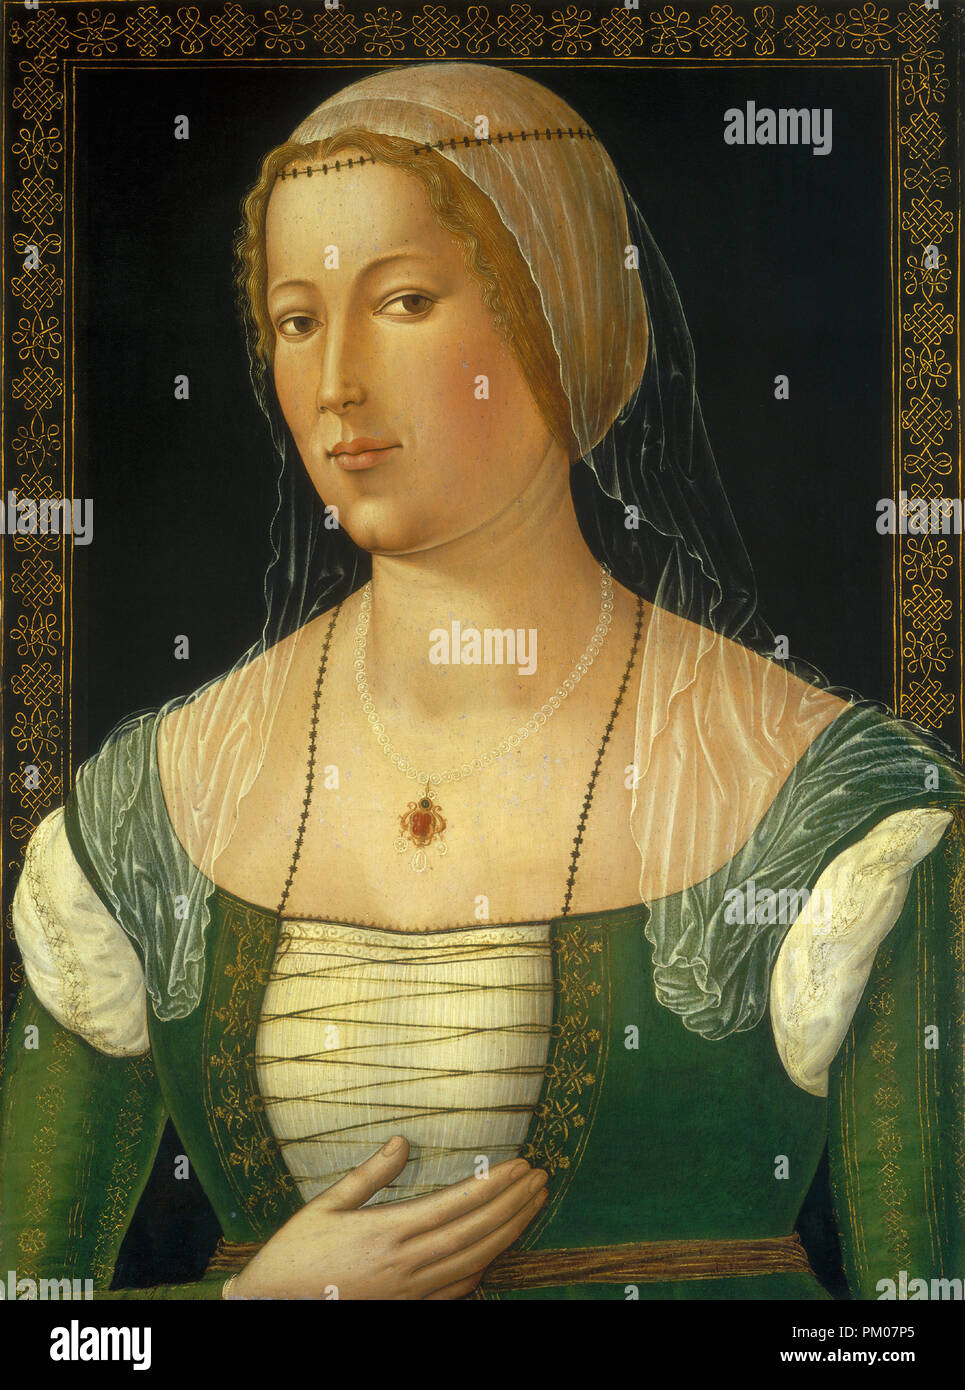 Portrait of a Young Woman. Dated: c. 1508. Dimensions: painted surface: 58.1 x 43.2 cm (22 7/8 x 17 in.)  overall: 60 x 45 cm (23 5/8 x 17 11/16 in.)  framed: 75.6 x 59.7 x 8.3 cm (29 3/4 x 23 1/2 x 3 1/4 in.). Medium: oil on poplar panel. Museum: National Gallery of Art, Washington DC. Author: GIROLAMO DI BENVENUTO. Stock Photo